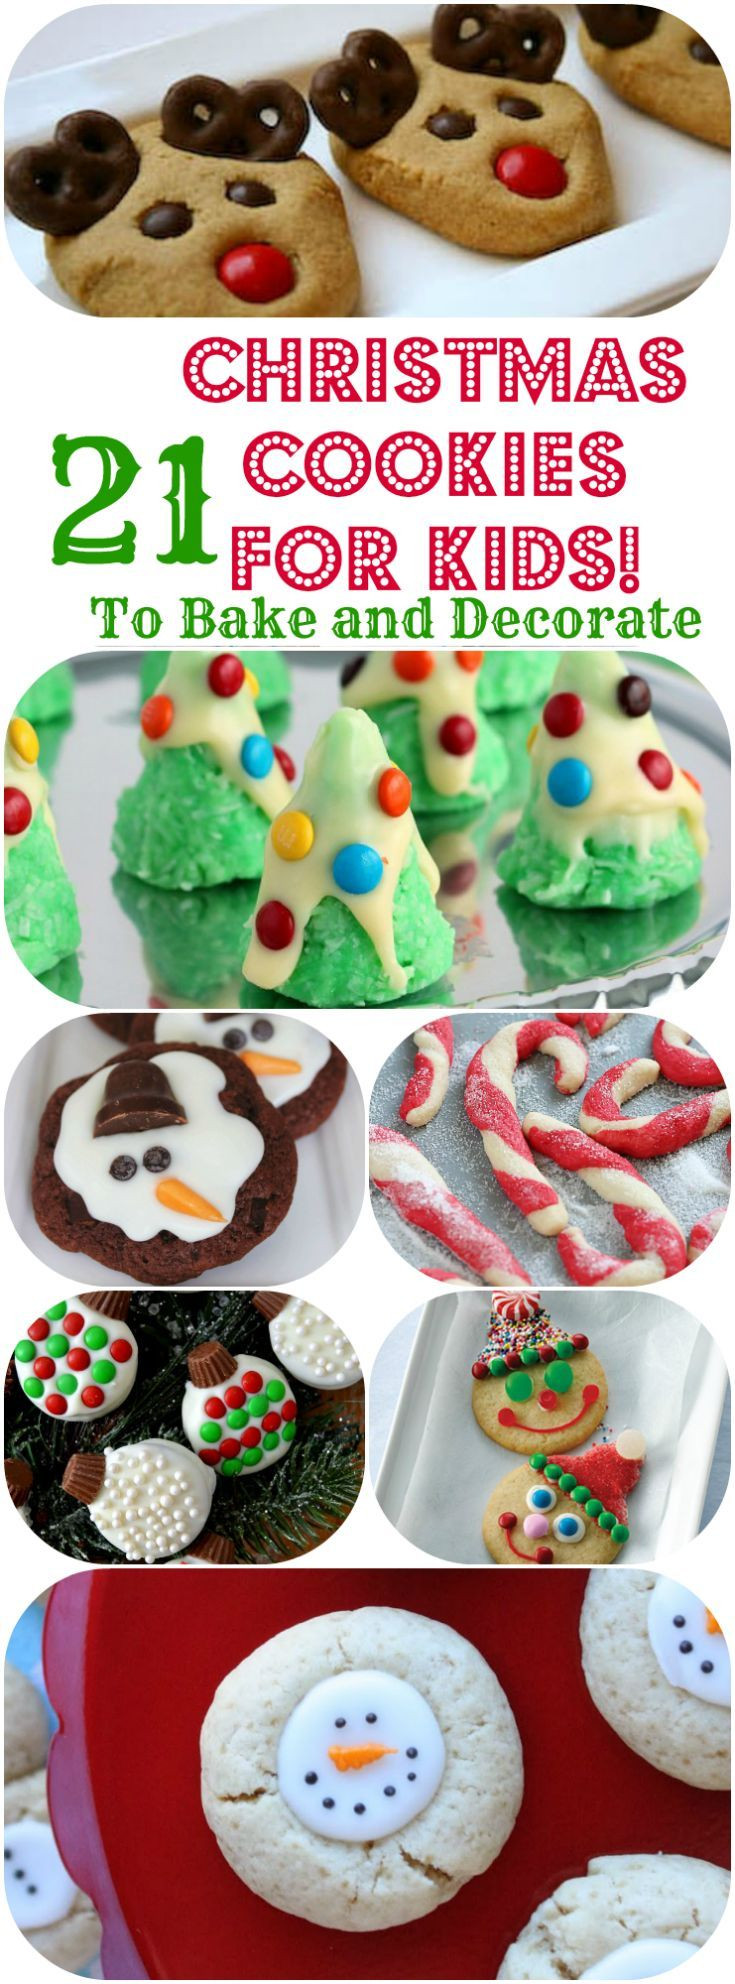 Christmas Desserts For Kids
 1000 ideas about Kid Desserts on Pinterest